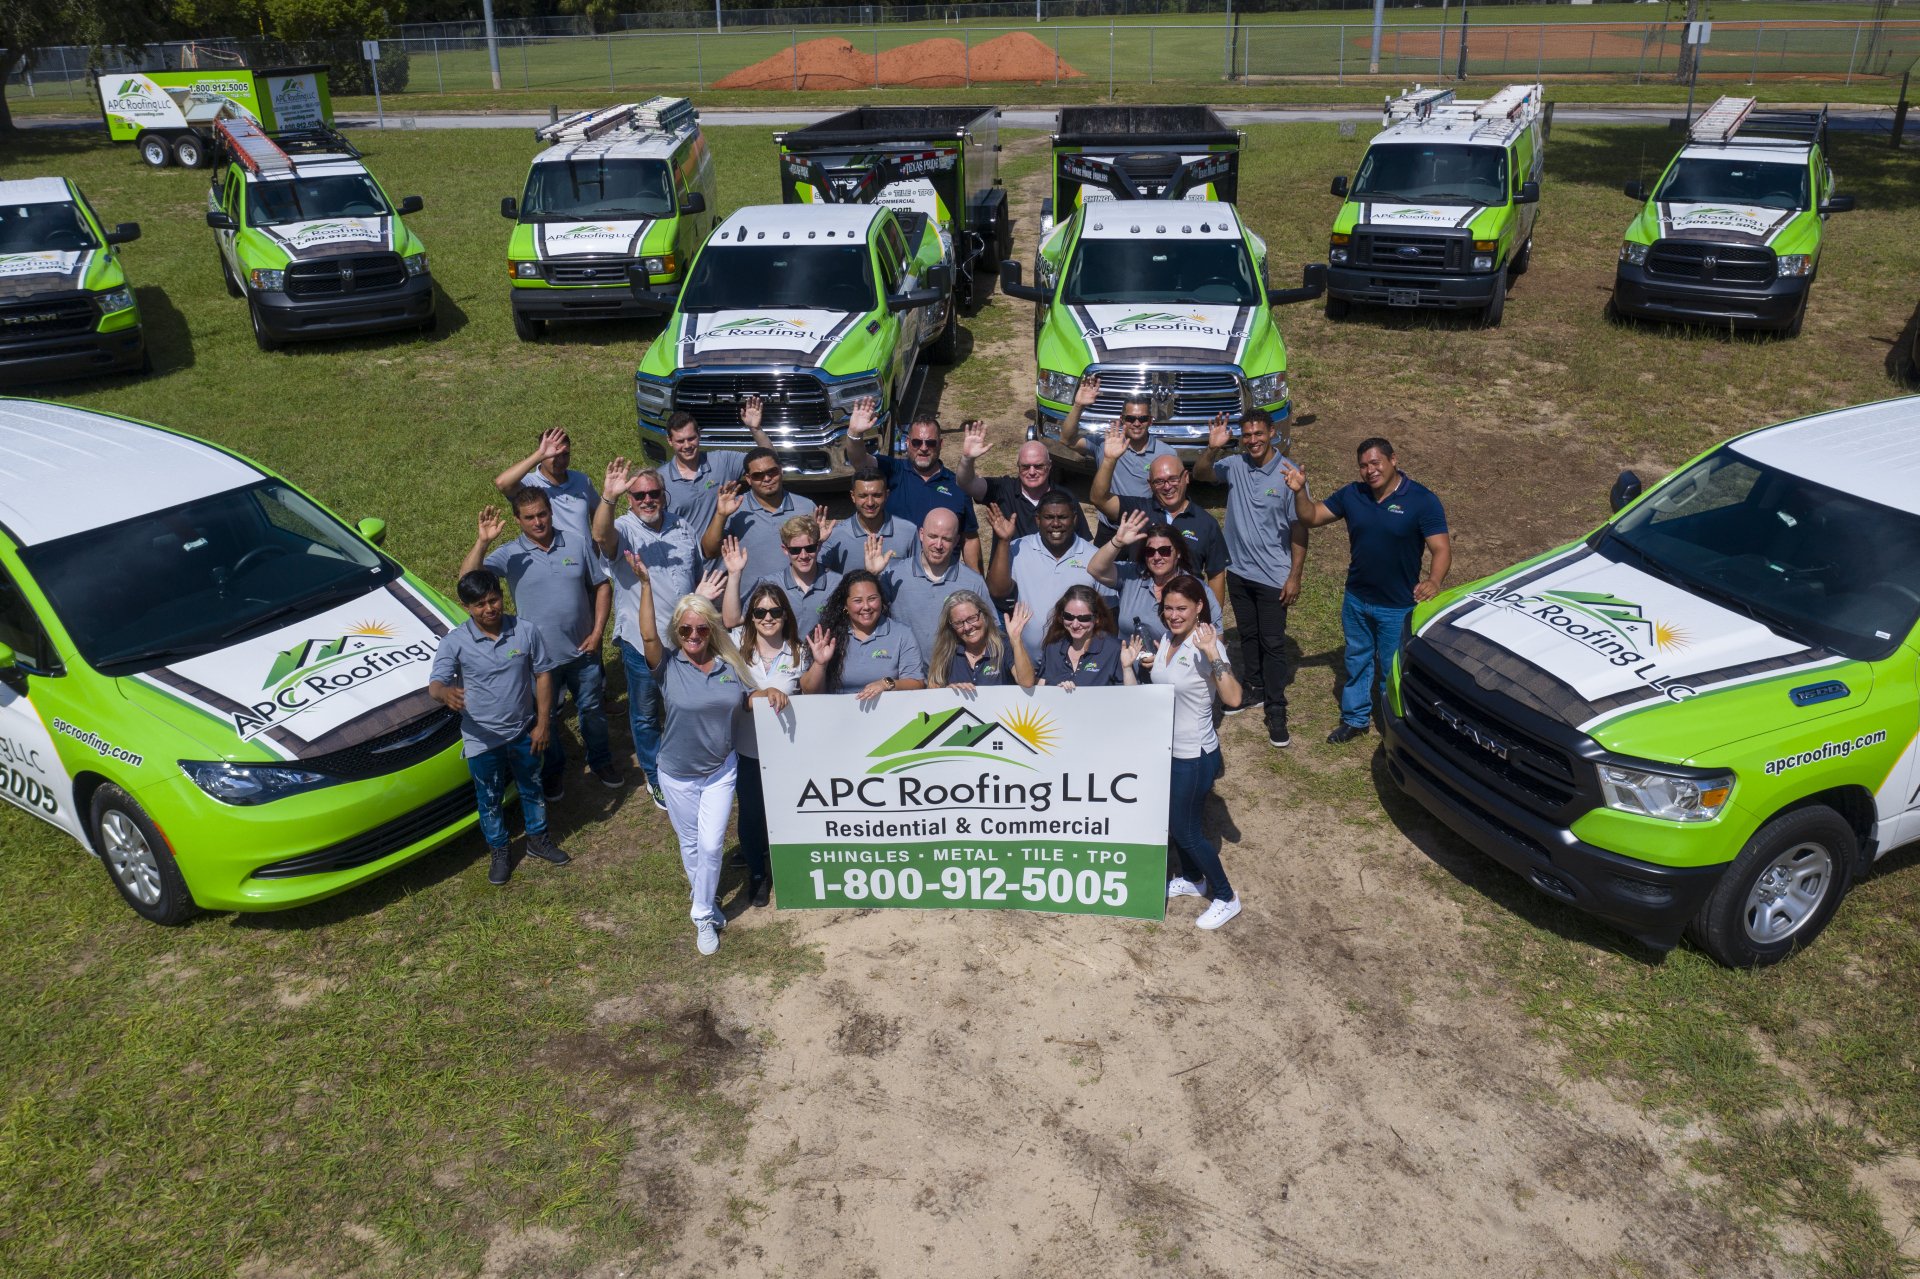 APC Roofing in Clermont, FL - Vehicles and staff